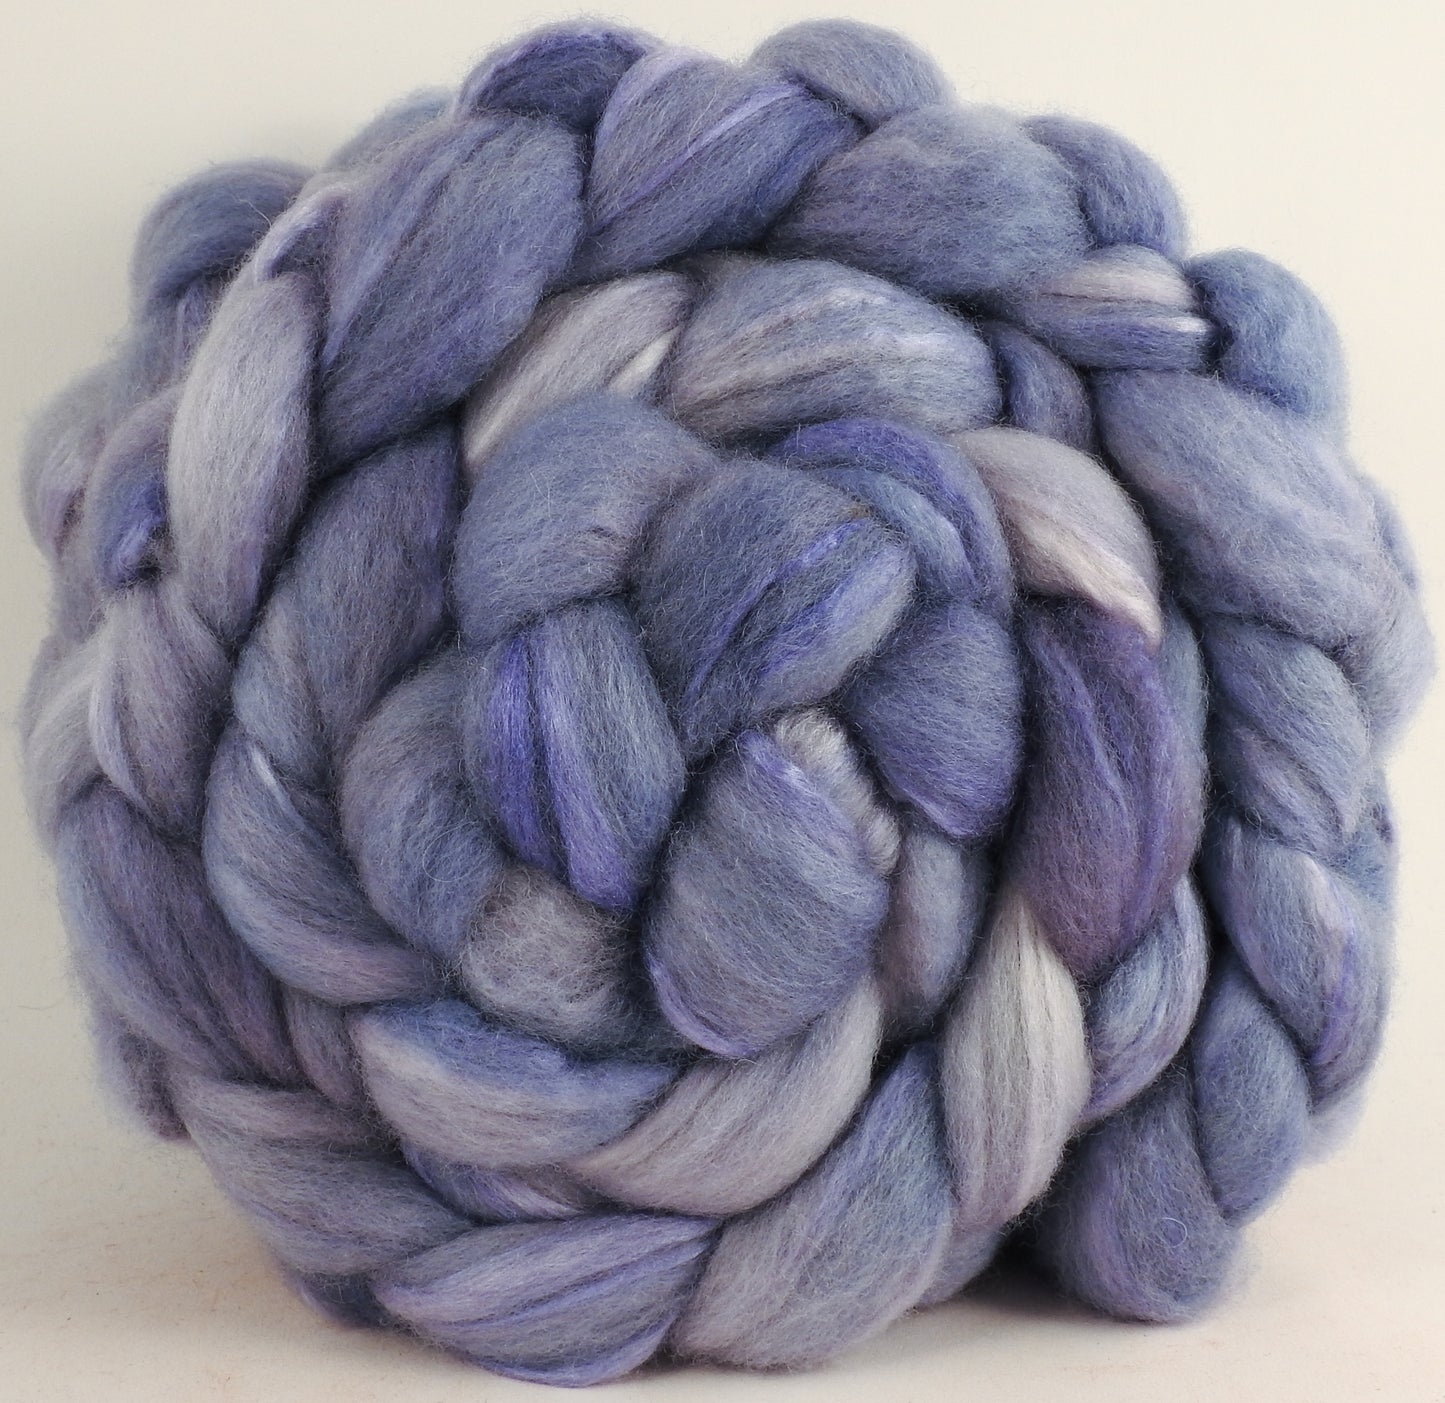 Blue-faced Leicester/ Tussah Silk (70/30) - Silver Lining - (5.6 oz.)